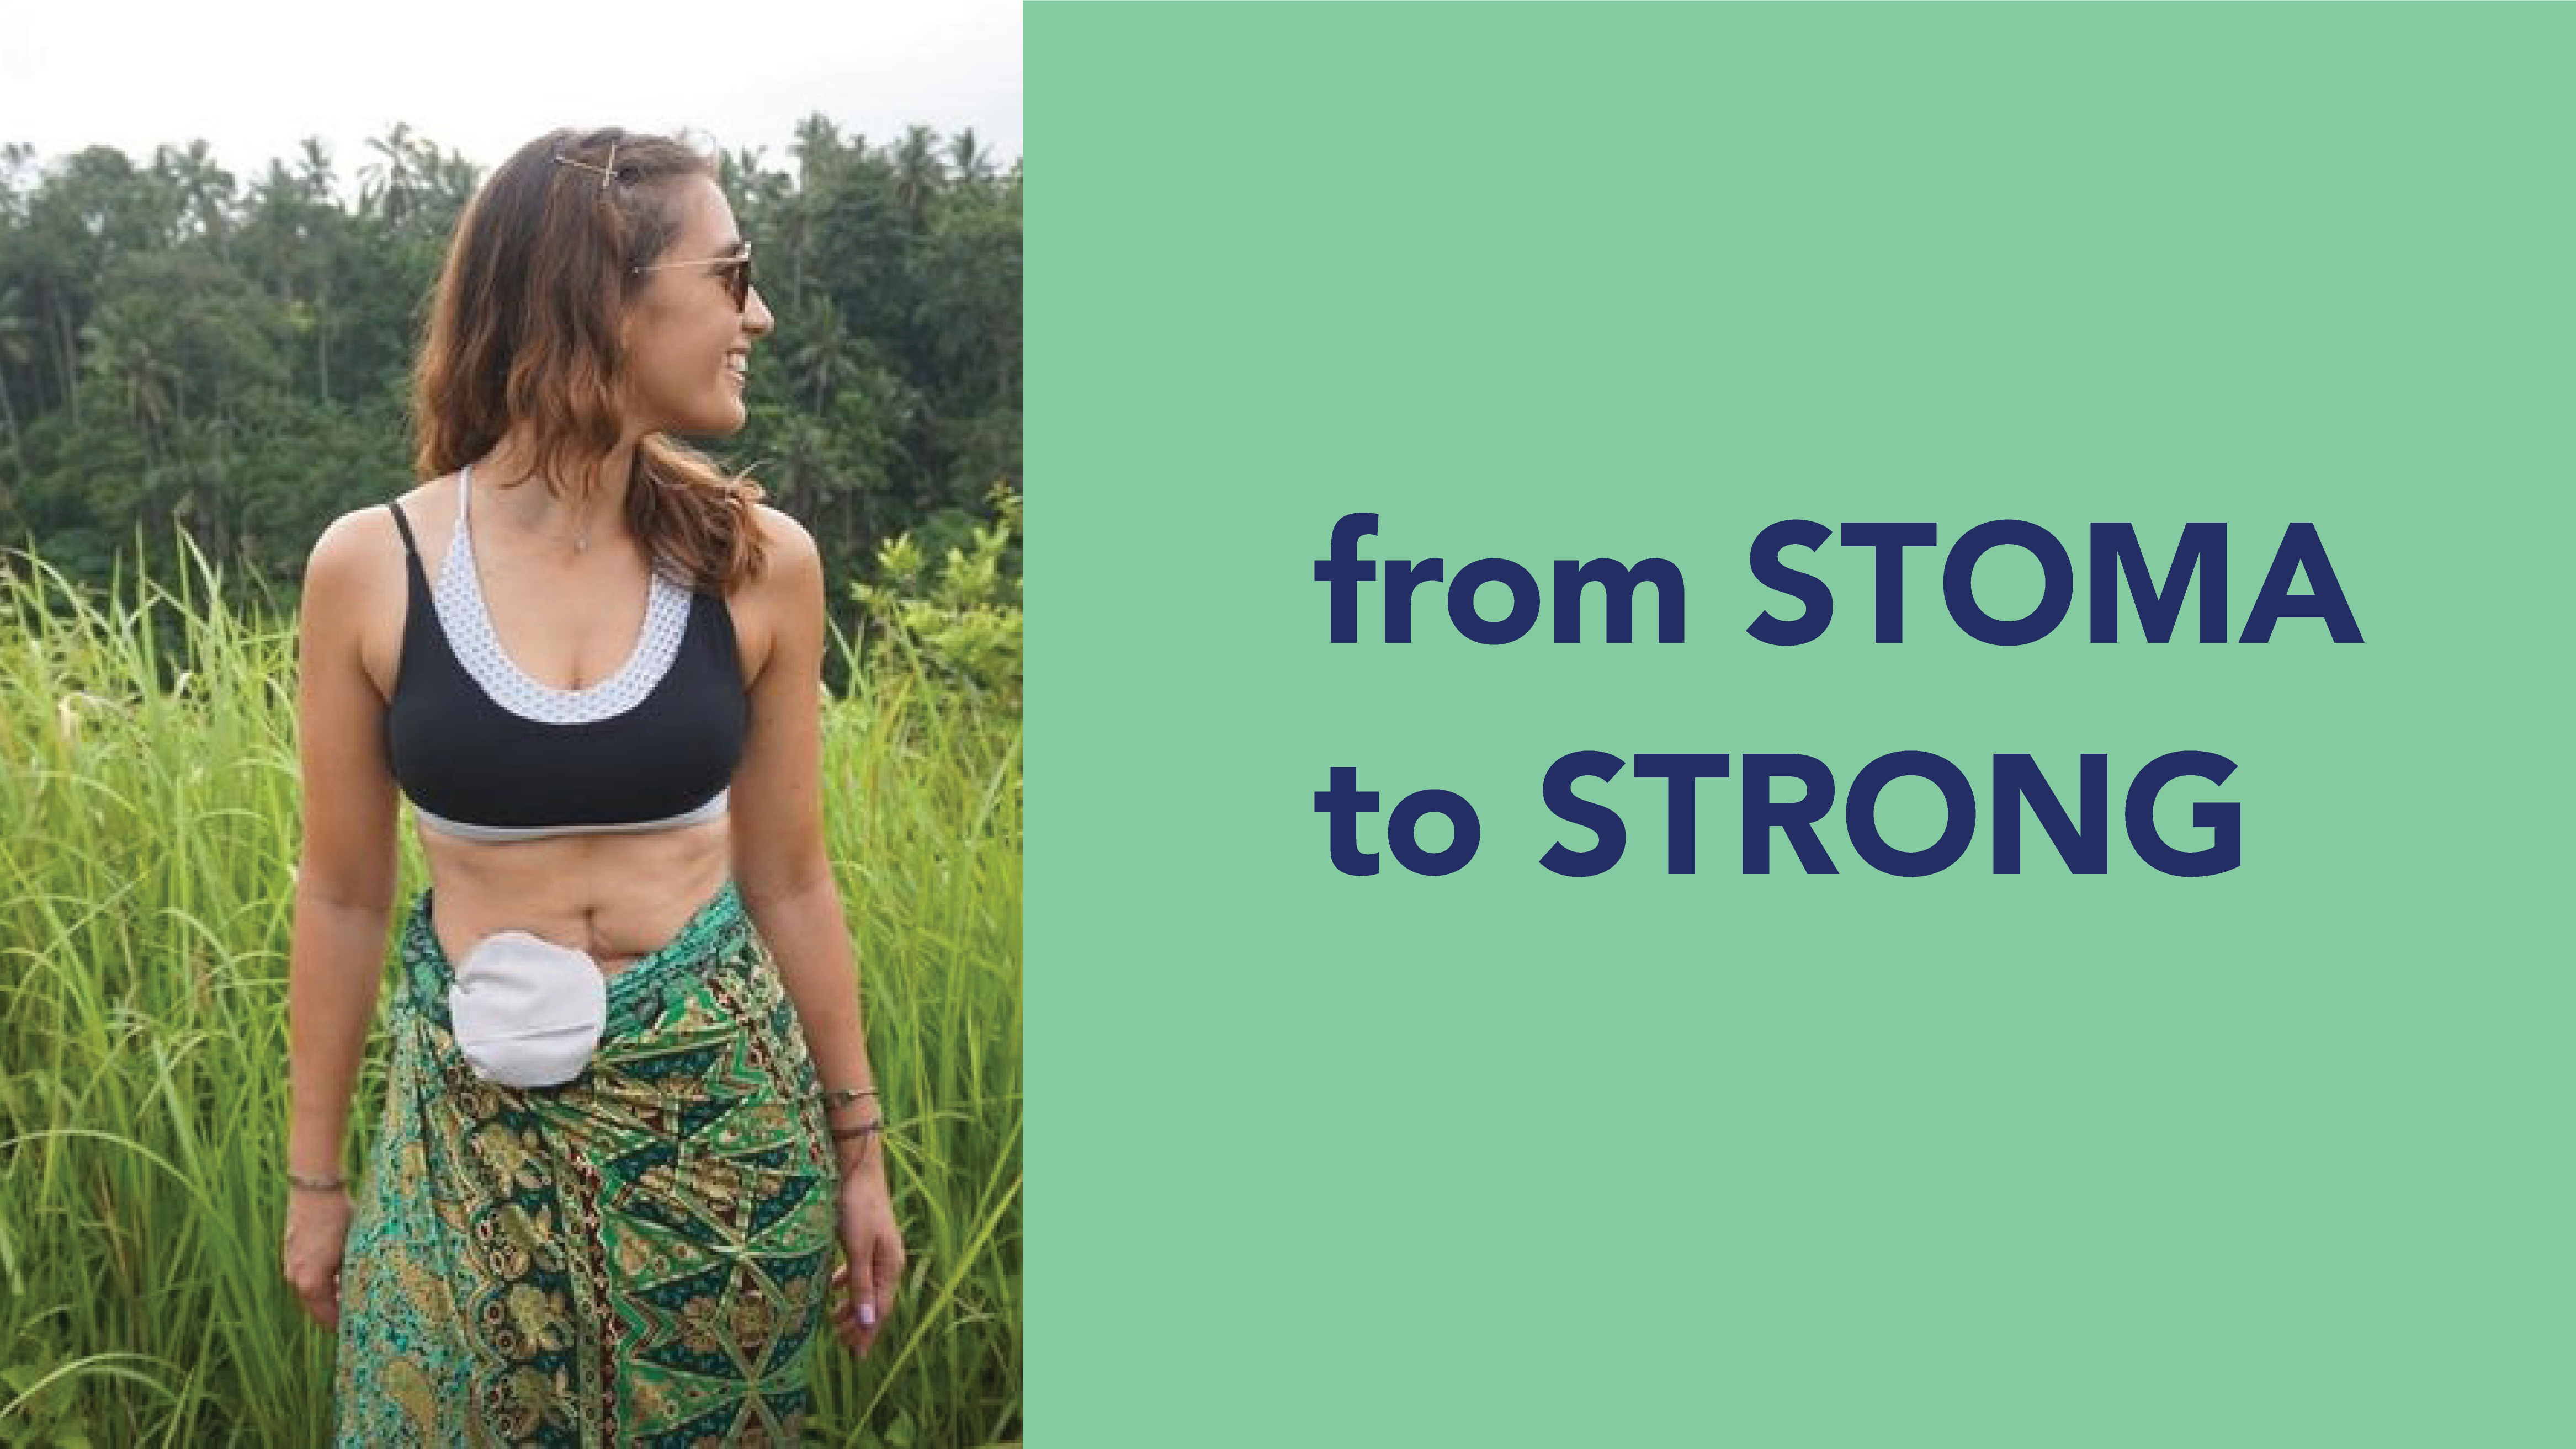 From Stoma to Strong